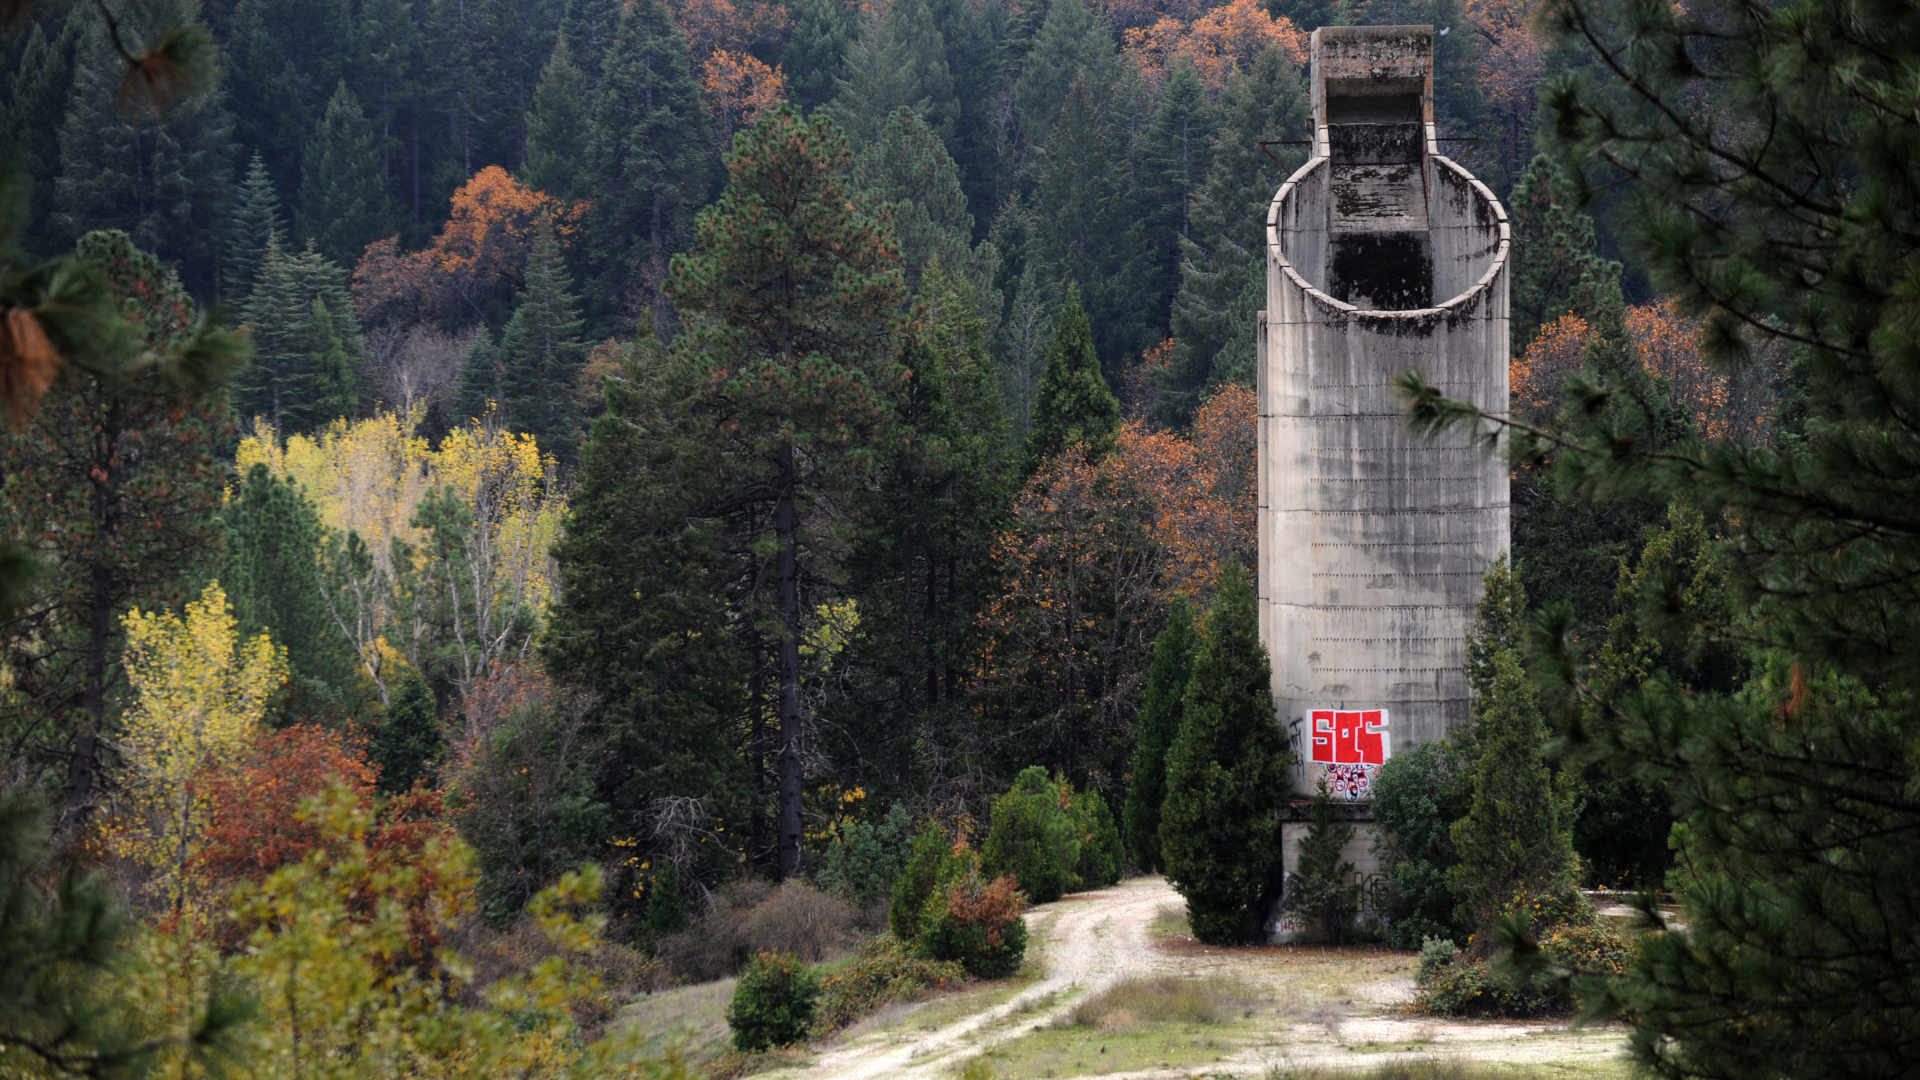 The site of an abandoned mine near Grass Valley, California, is marked by a weathered concrete silo. All visuals by BECKI ROBINS for UNDARK